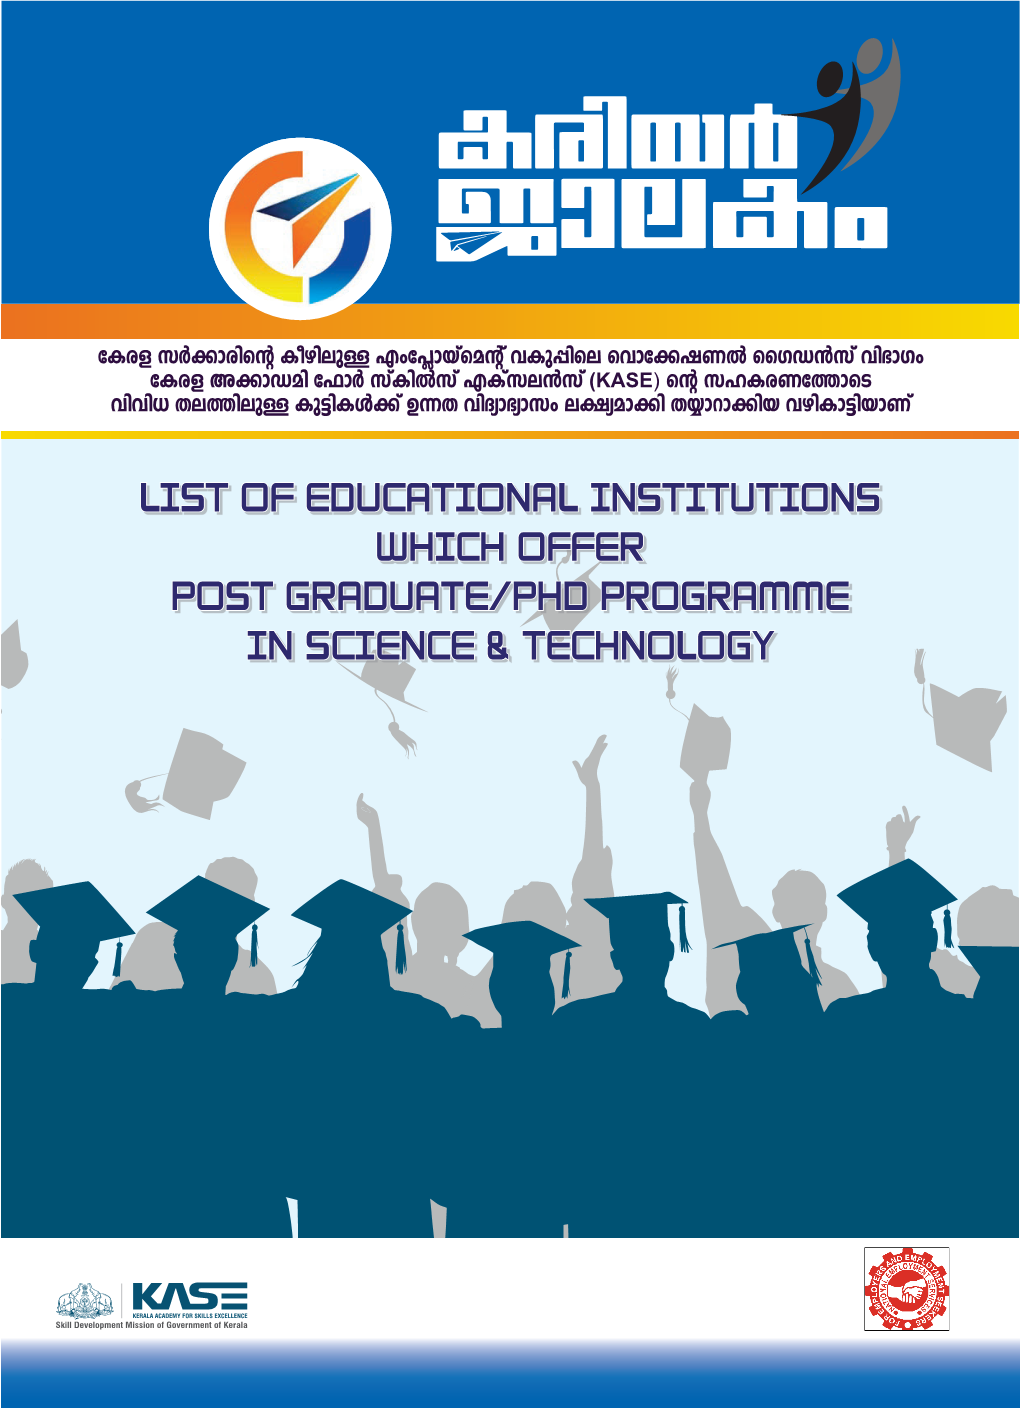 List of Educational Institutions Which Offer Post Graduate/Phd Programme